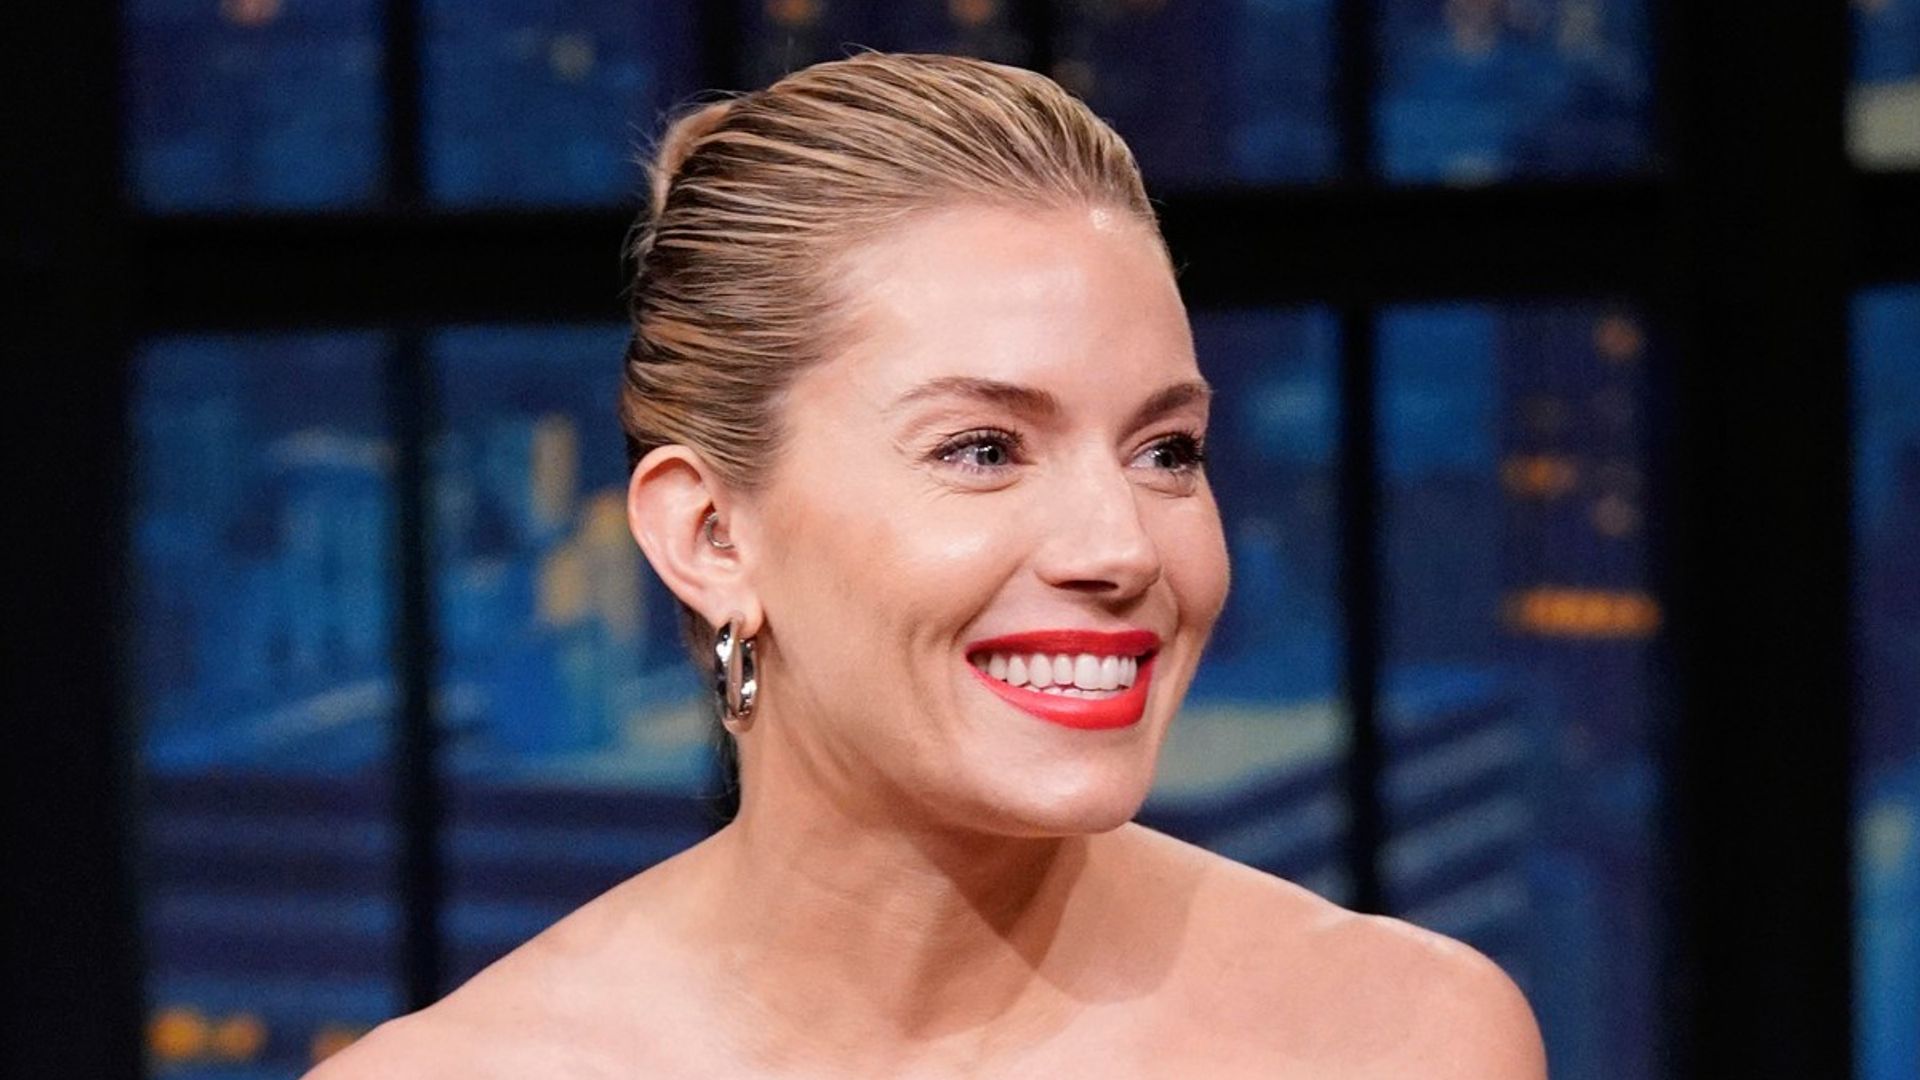 Sienna Miller wows in stunning figure-hugging dress during appearance on  Seth Meyers